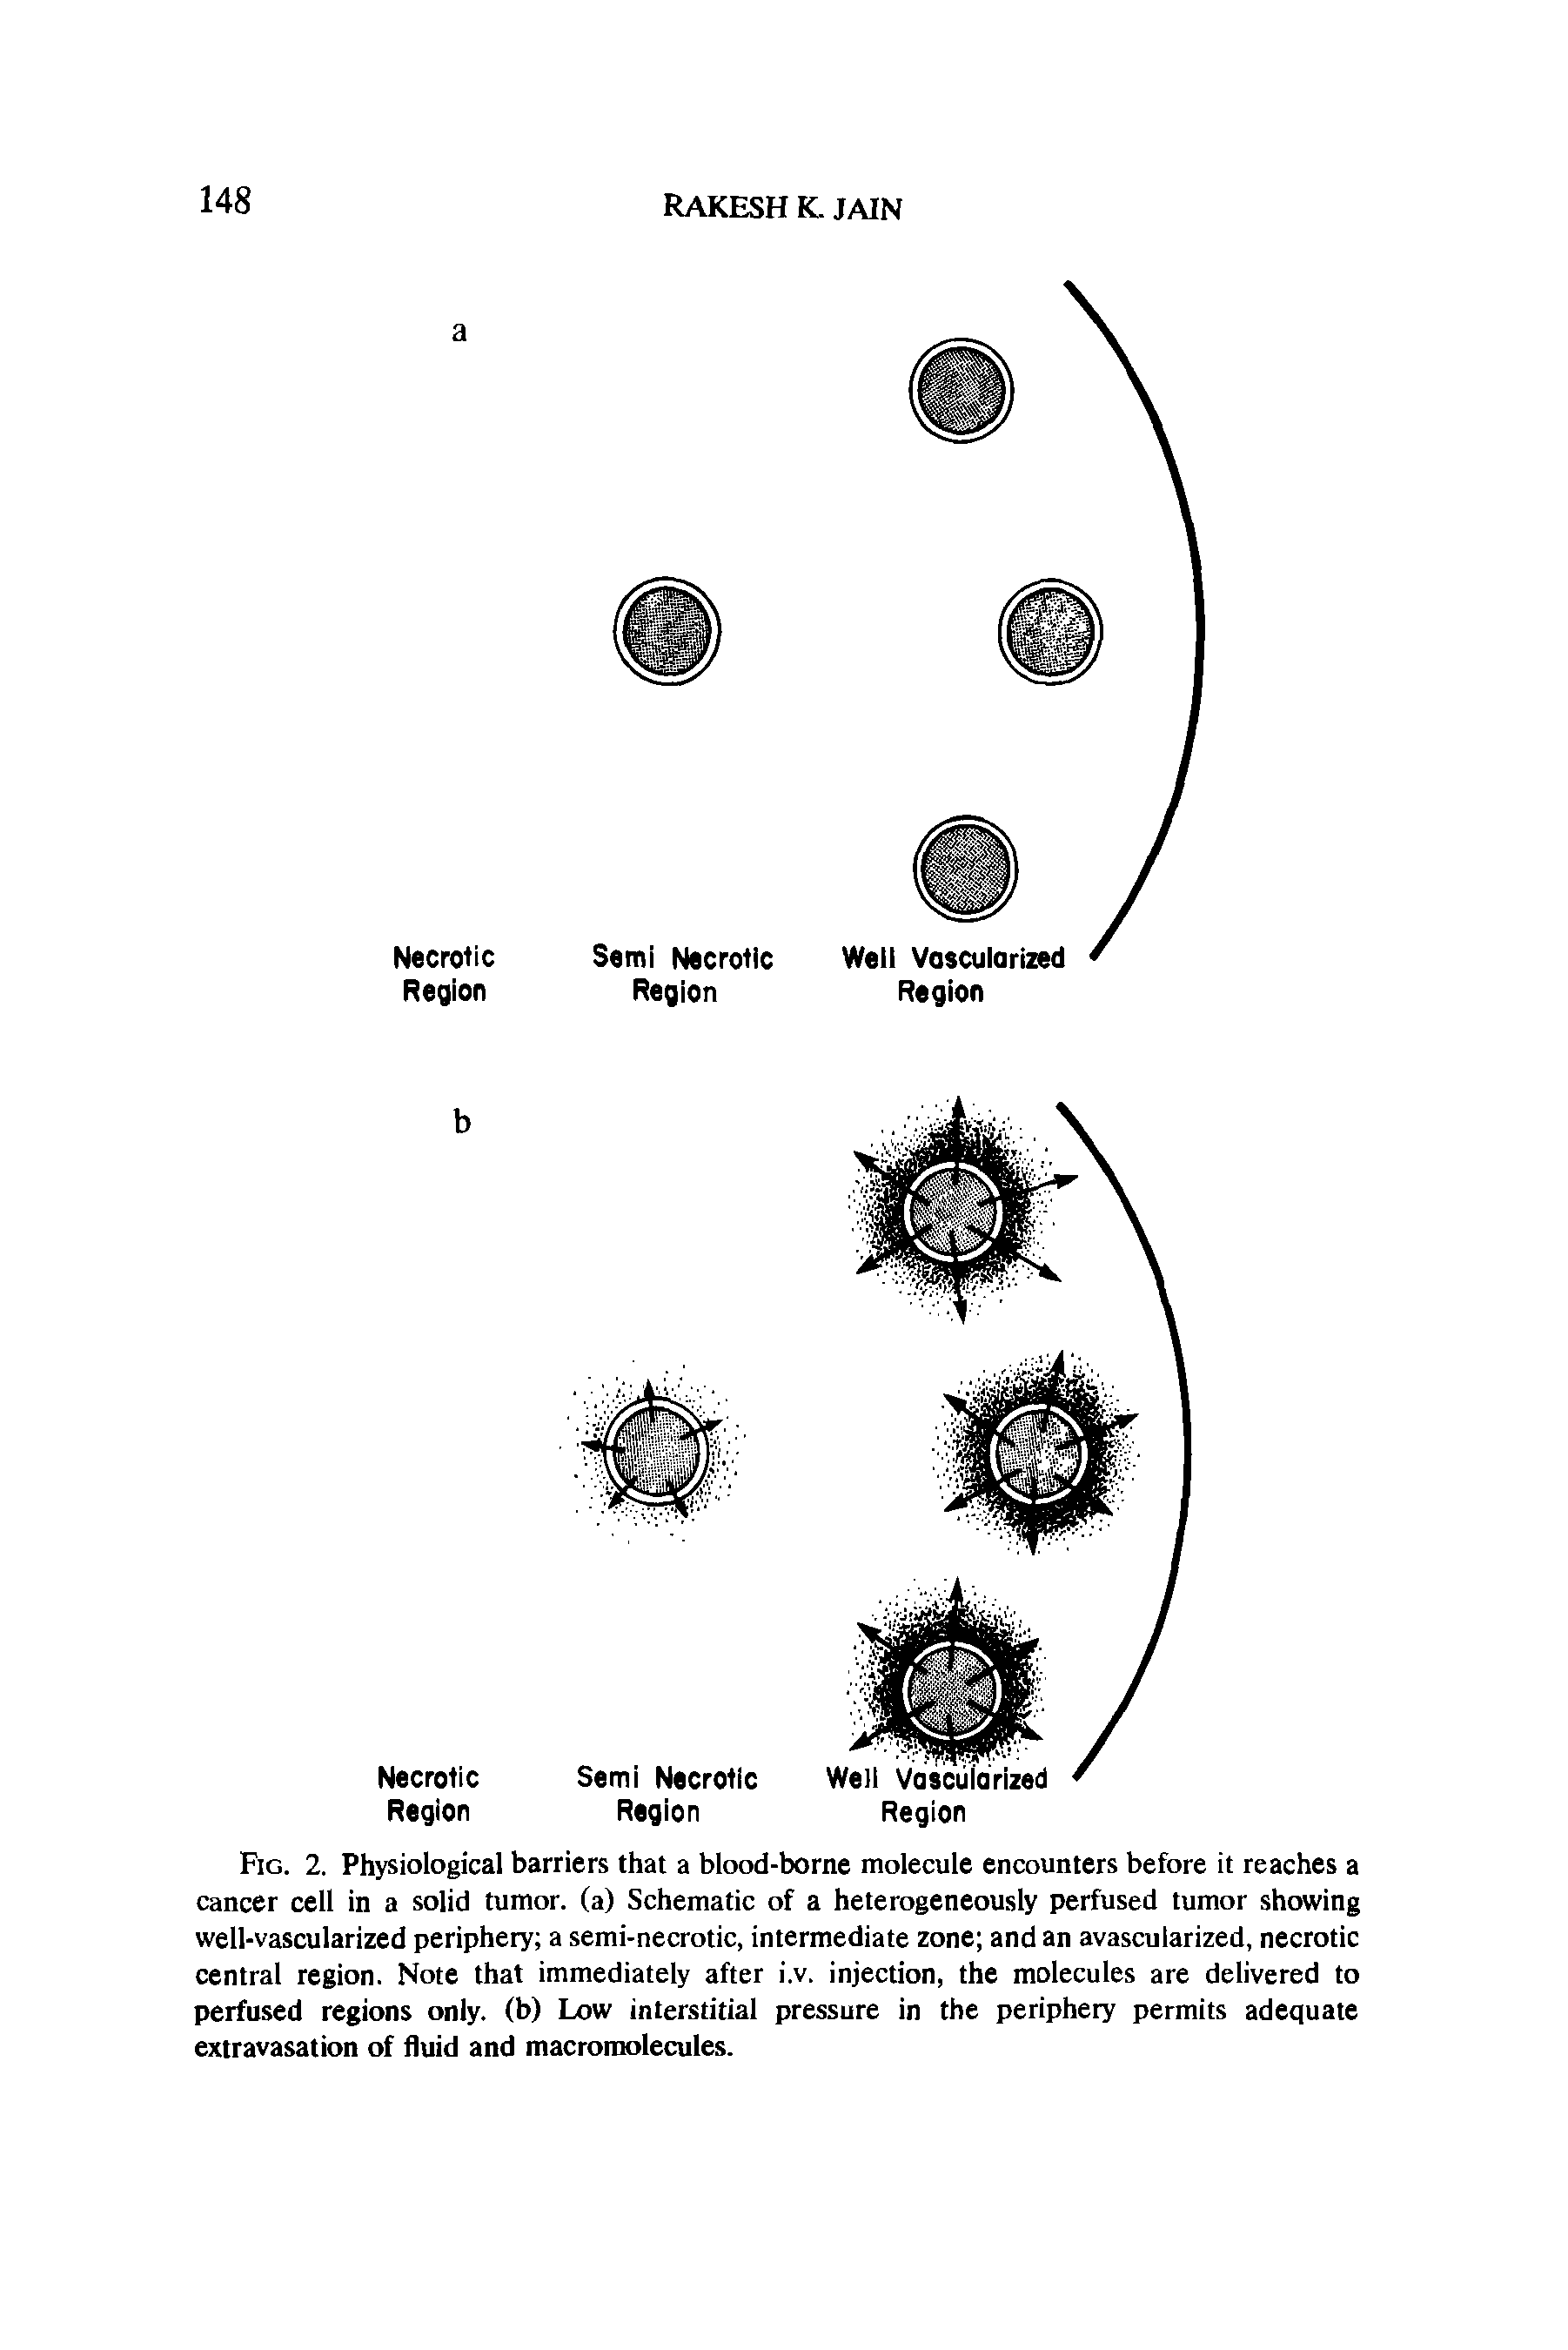 Fig. 2. Physiological barriers that a blood-borne molecule encounters before it reaches a cancer cell in a solid tumor, (a) Schematic of a heterogeneously perfused tumor showing well-vascularized periphery a semi-necrotic, intermediate zone and an avascularized, necrotic central region. Note that immediately after i.v. injection, the molecules are delivered to perfused regions only, (b) Low interstitial pressure in the periphery permits adequate extravasation of fluid and macromolecules.